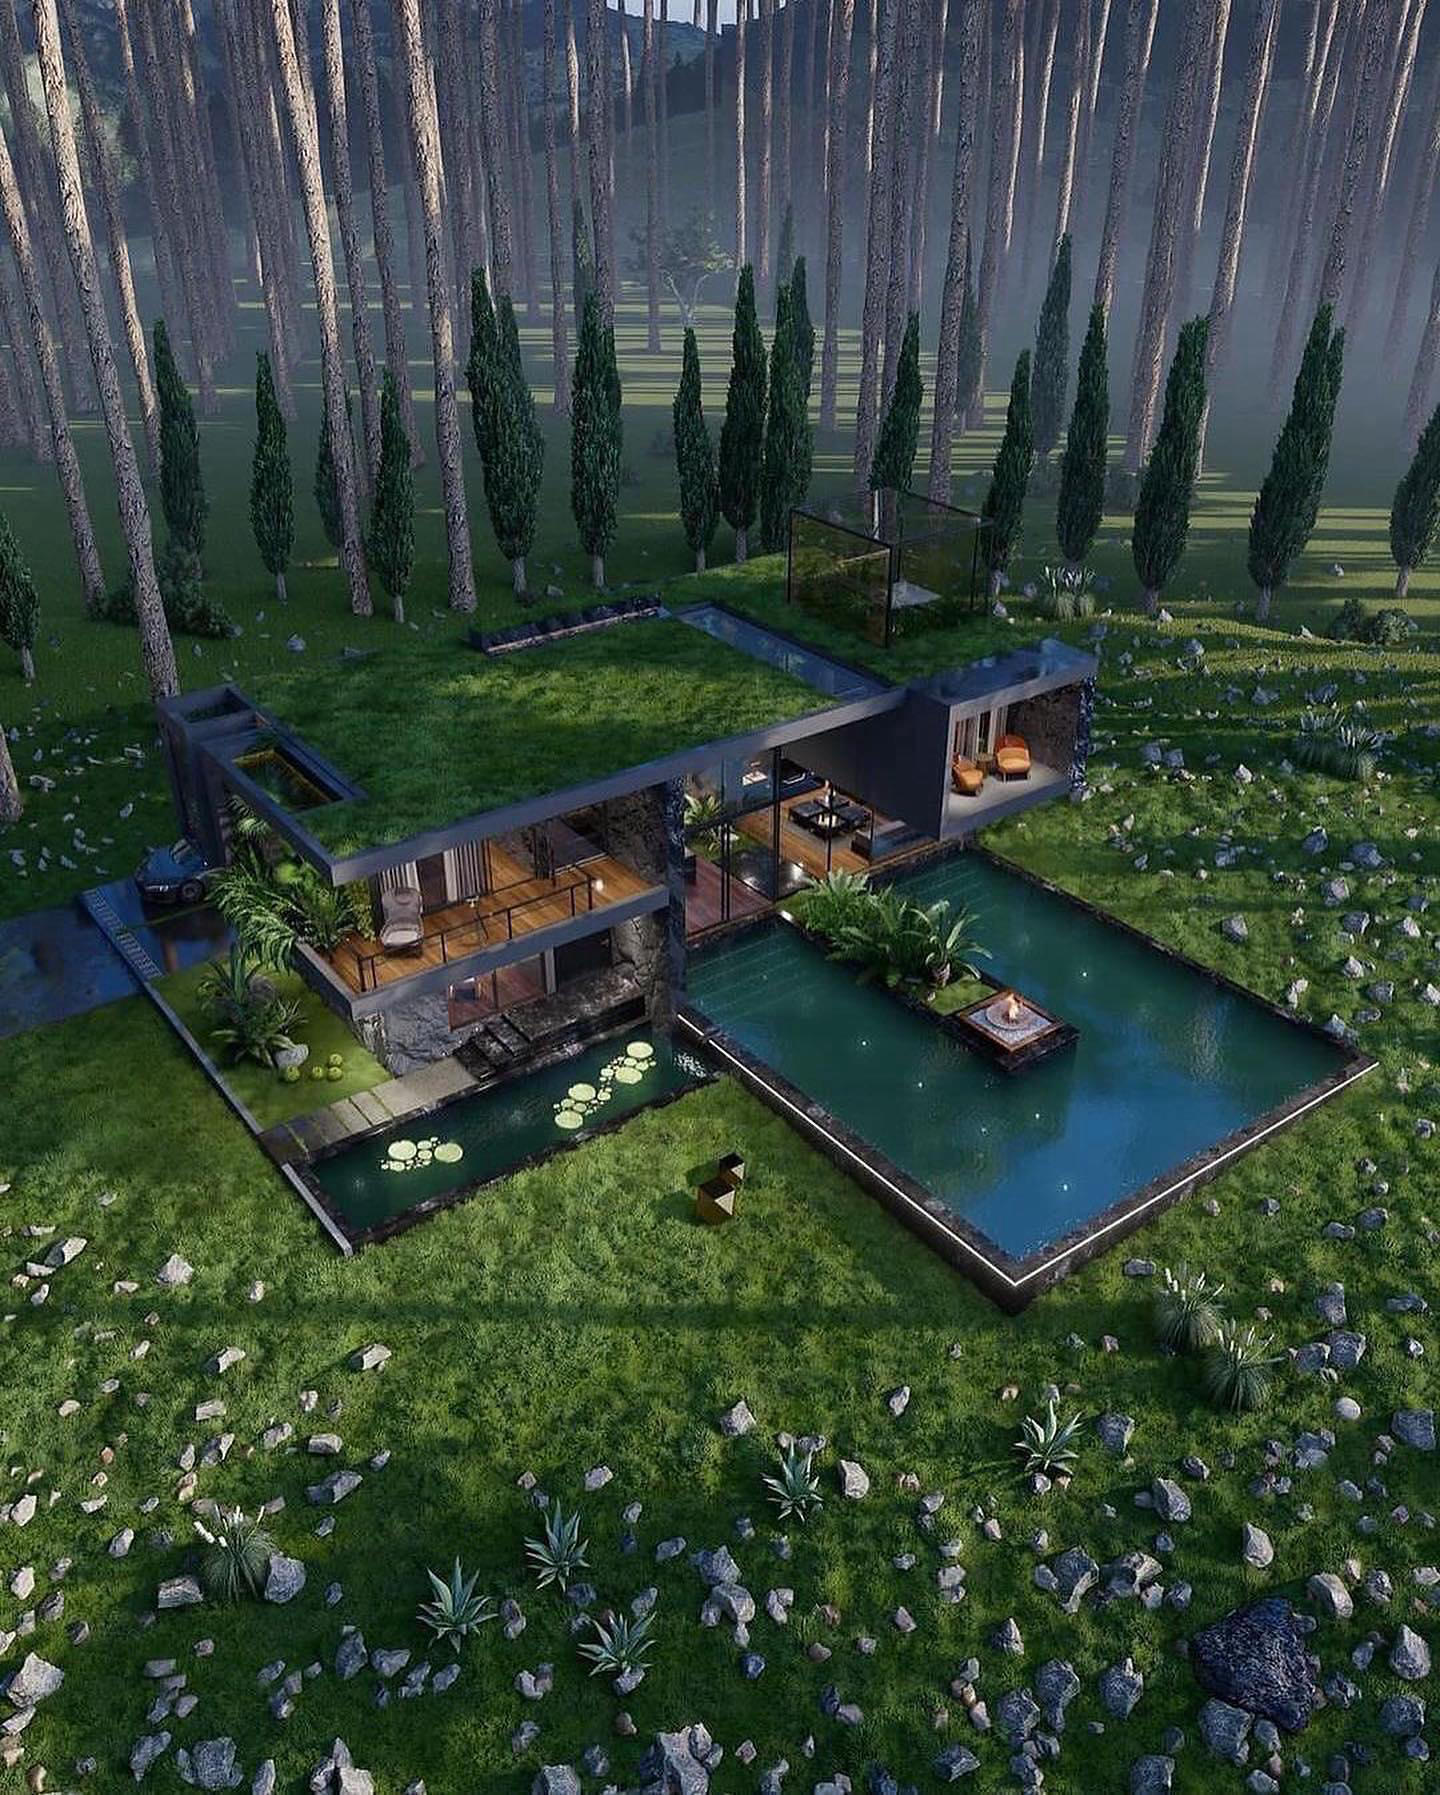 Millionaire Homes - Wouldn’t mind waking up here everyday